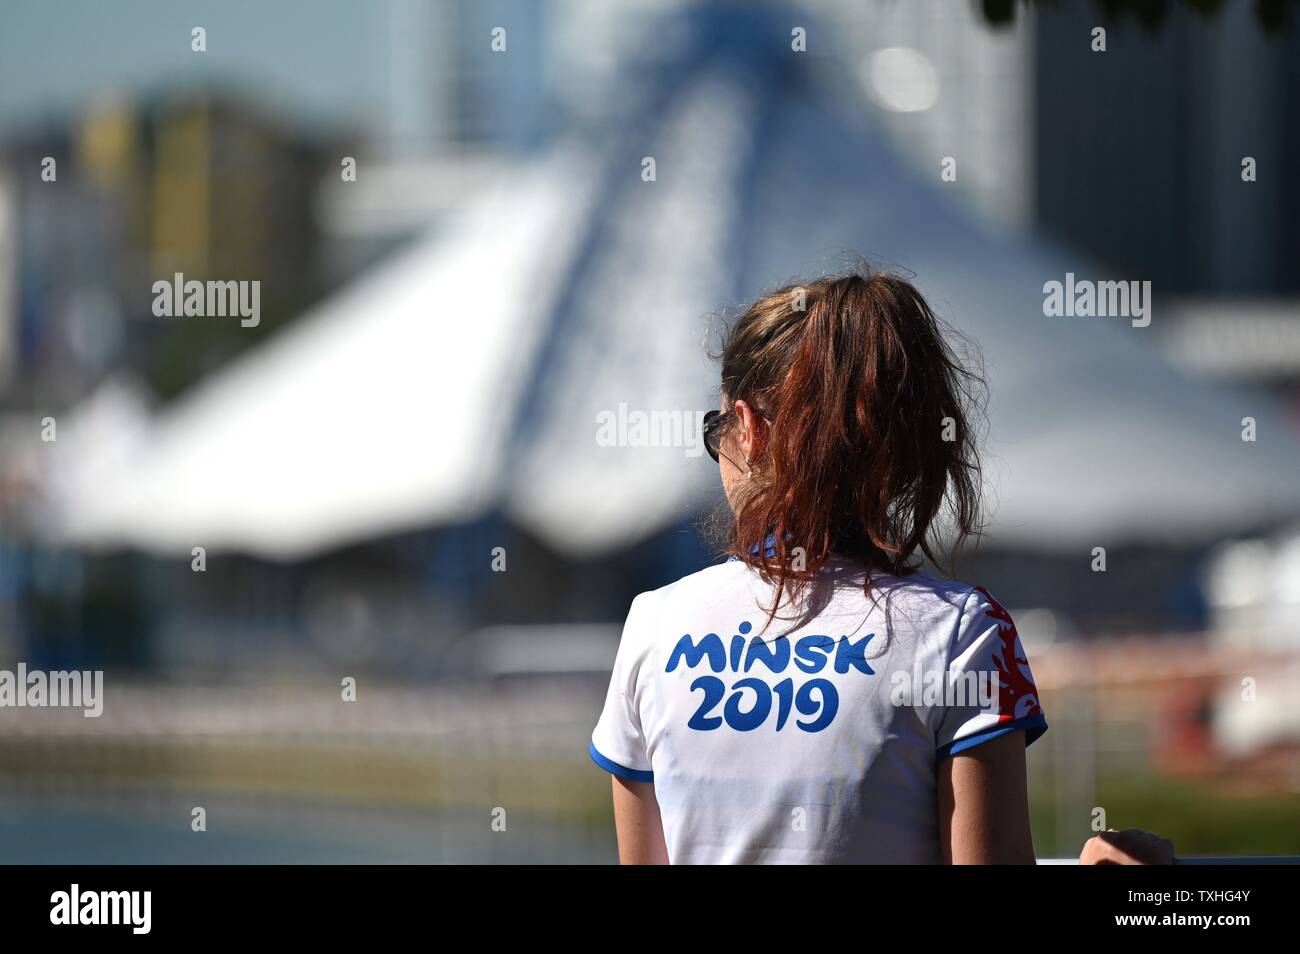 Minsk. Belarus. 25 June 2019. A volunteer waits for the cycling time trial at the 2nd European games to begin, with the city in the background. Credit: Sport In Pictures/Alamy Live News Stock Photo